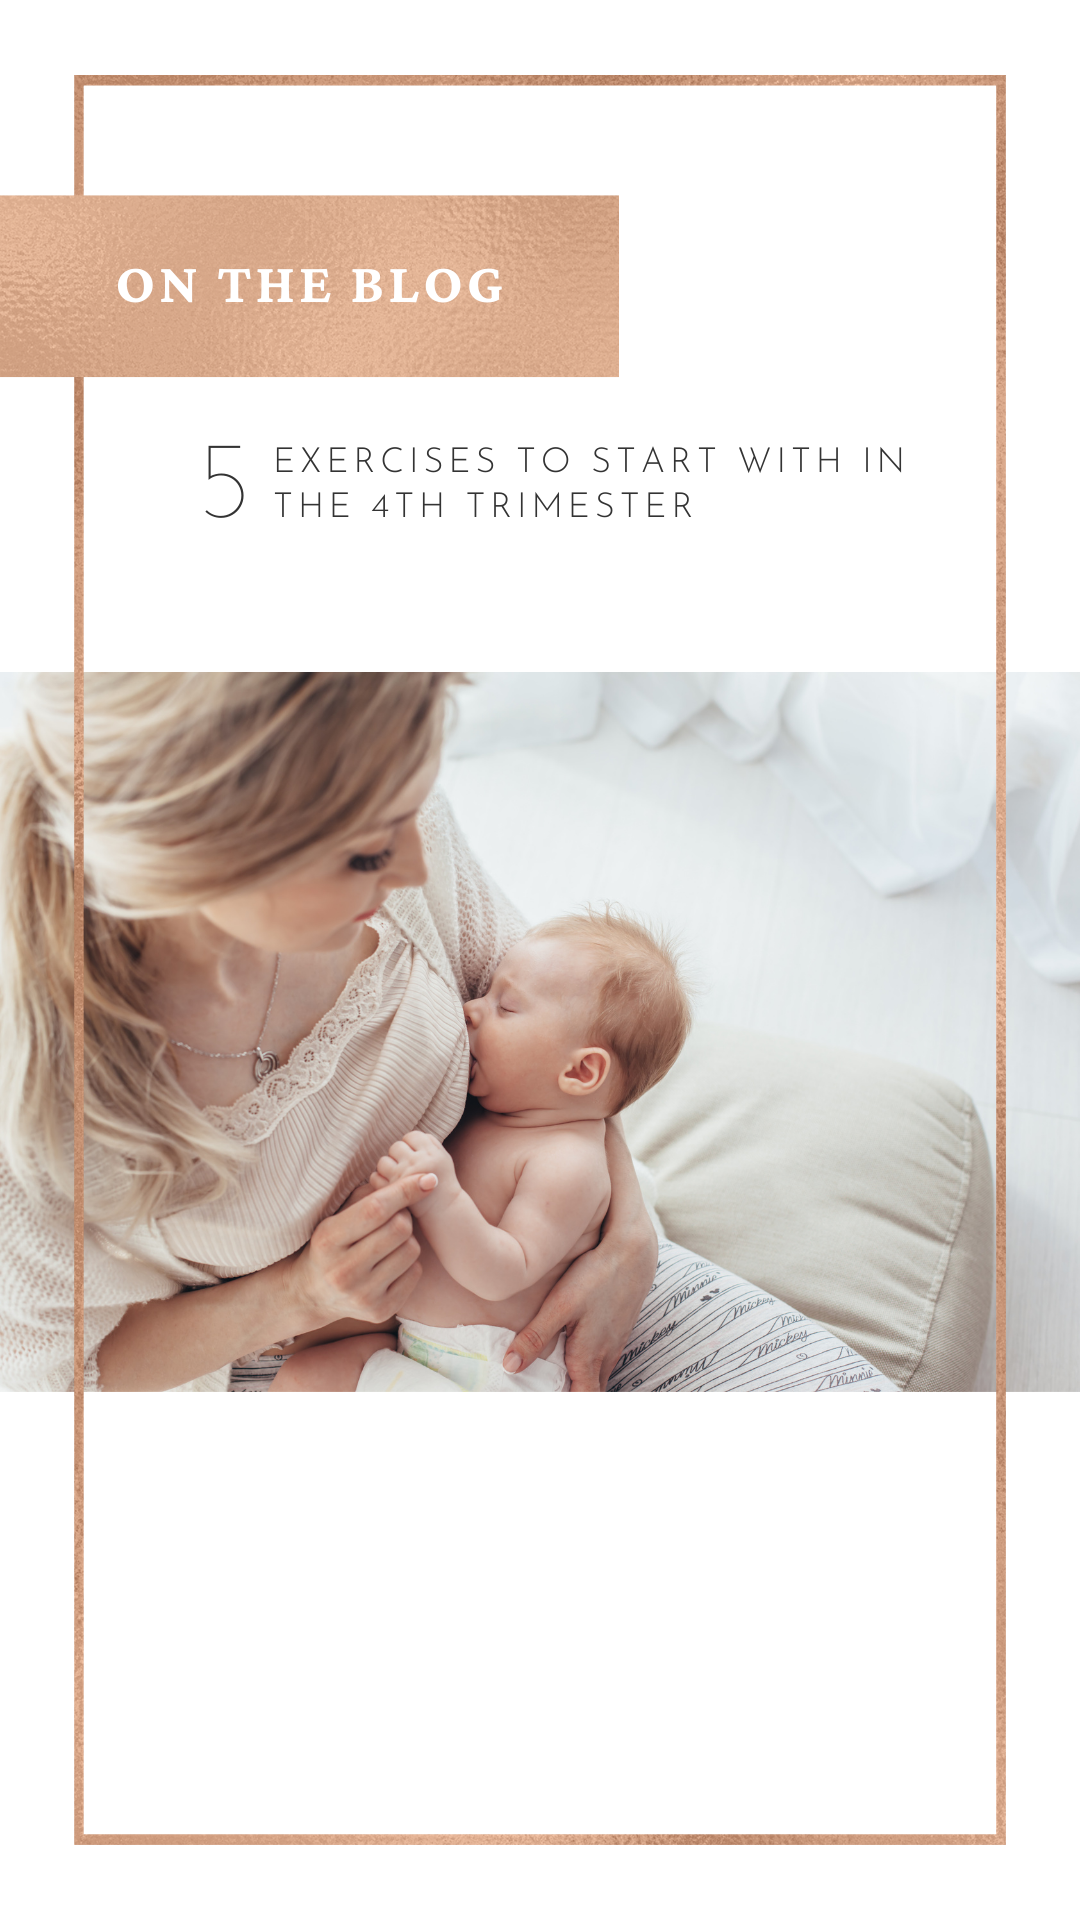 5 Exercises to Start With in the 4th Trimester